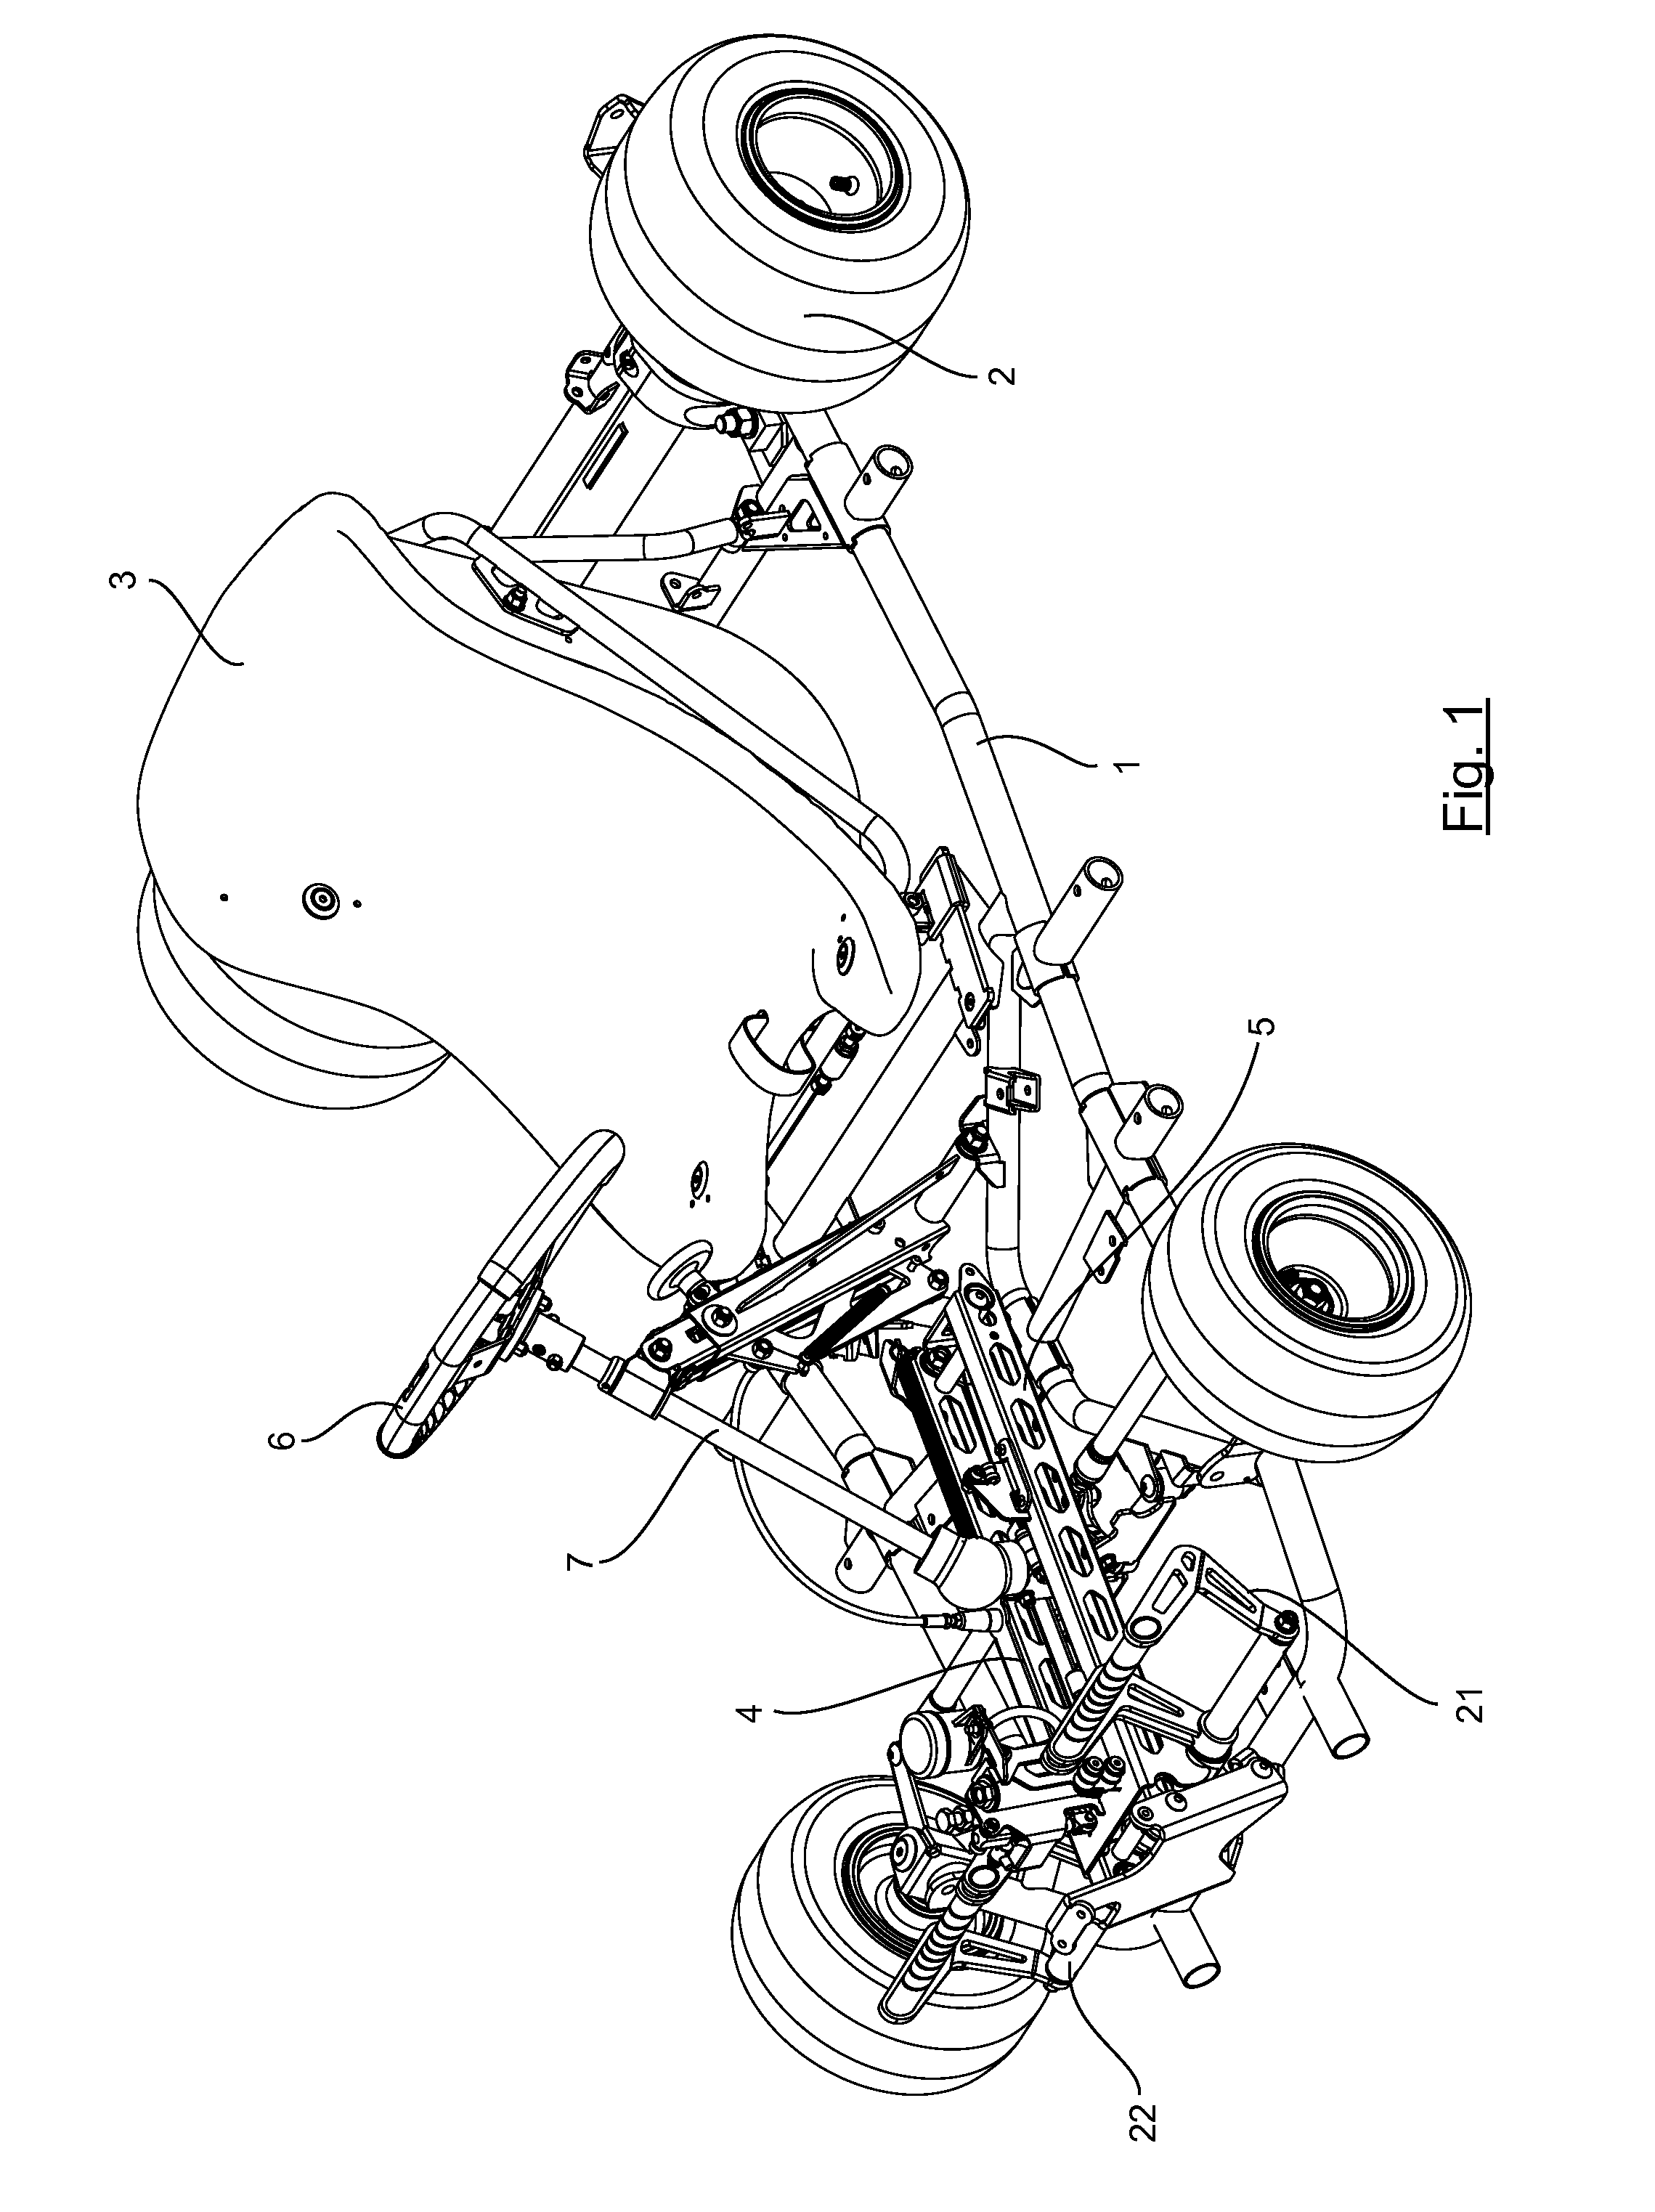 Kart Chassis with Increased Impact Resistance, and Corresponding Kart